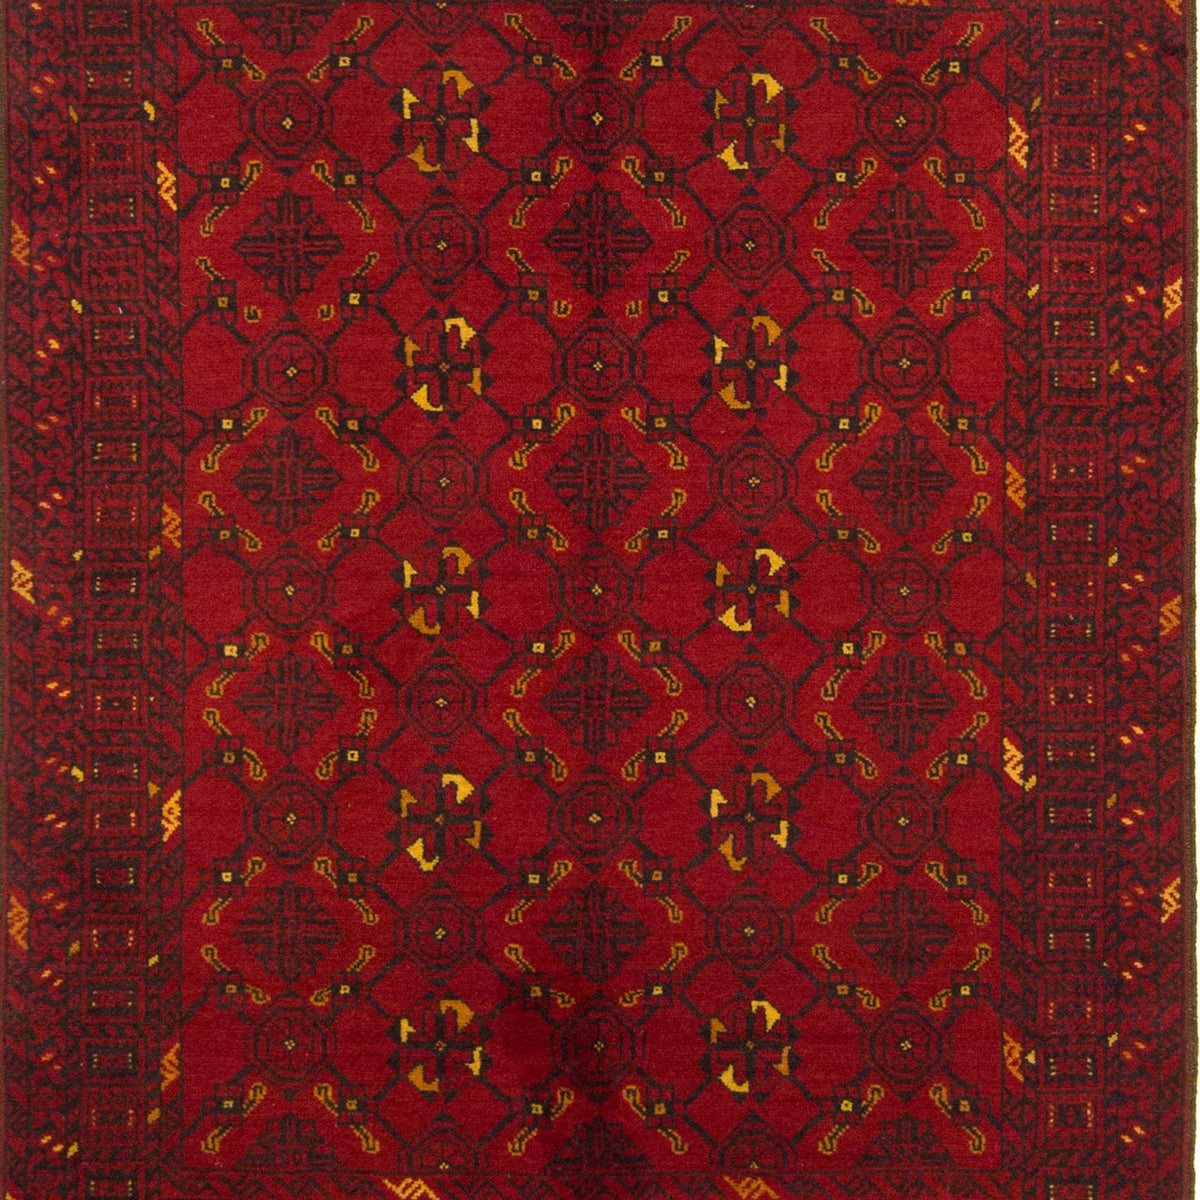 Fine Hand-knotted 100% Wool Vintage Turkmen Small Rug 104cm x 135cm